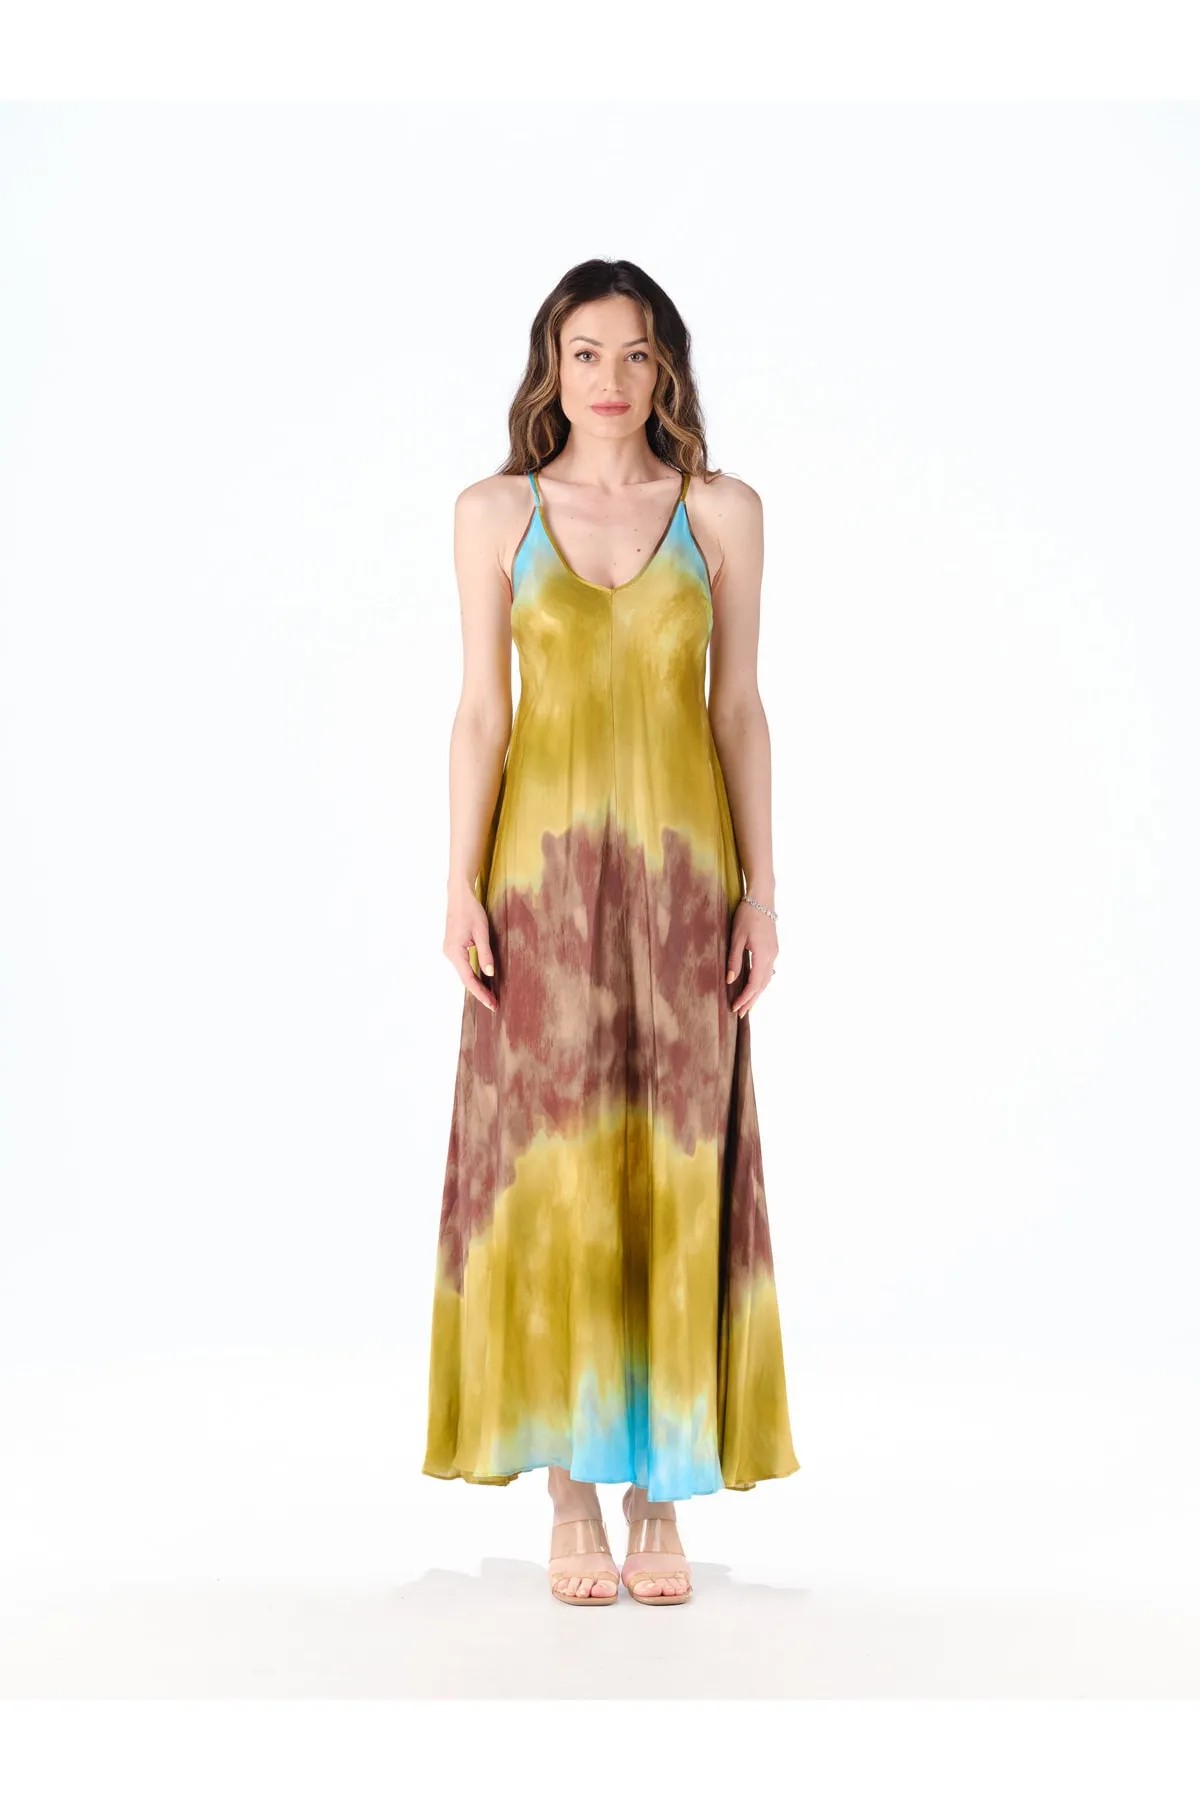 COLORFUL LONG DRESS WITH A LOW-COLLOW BACK